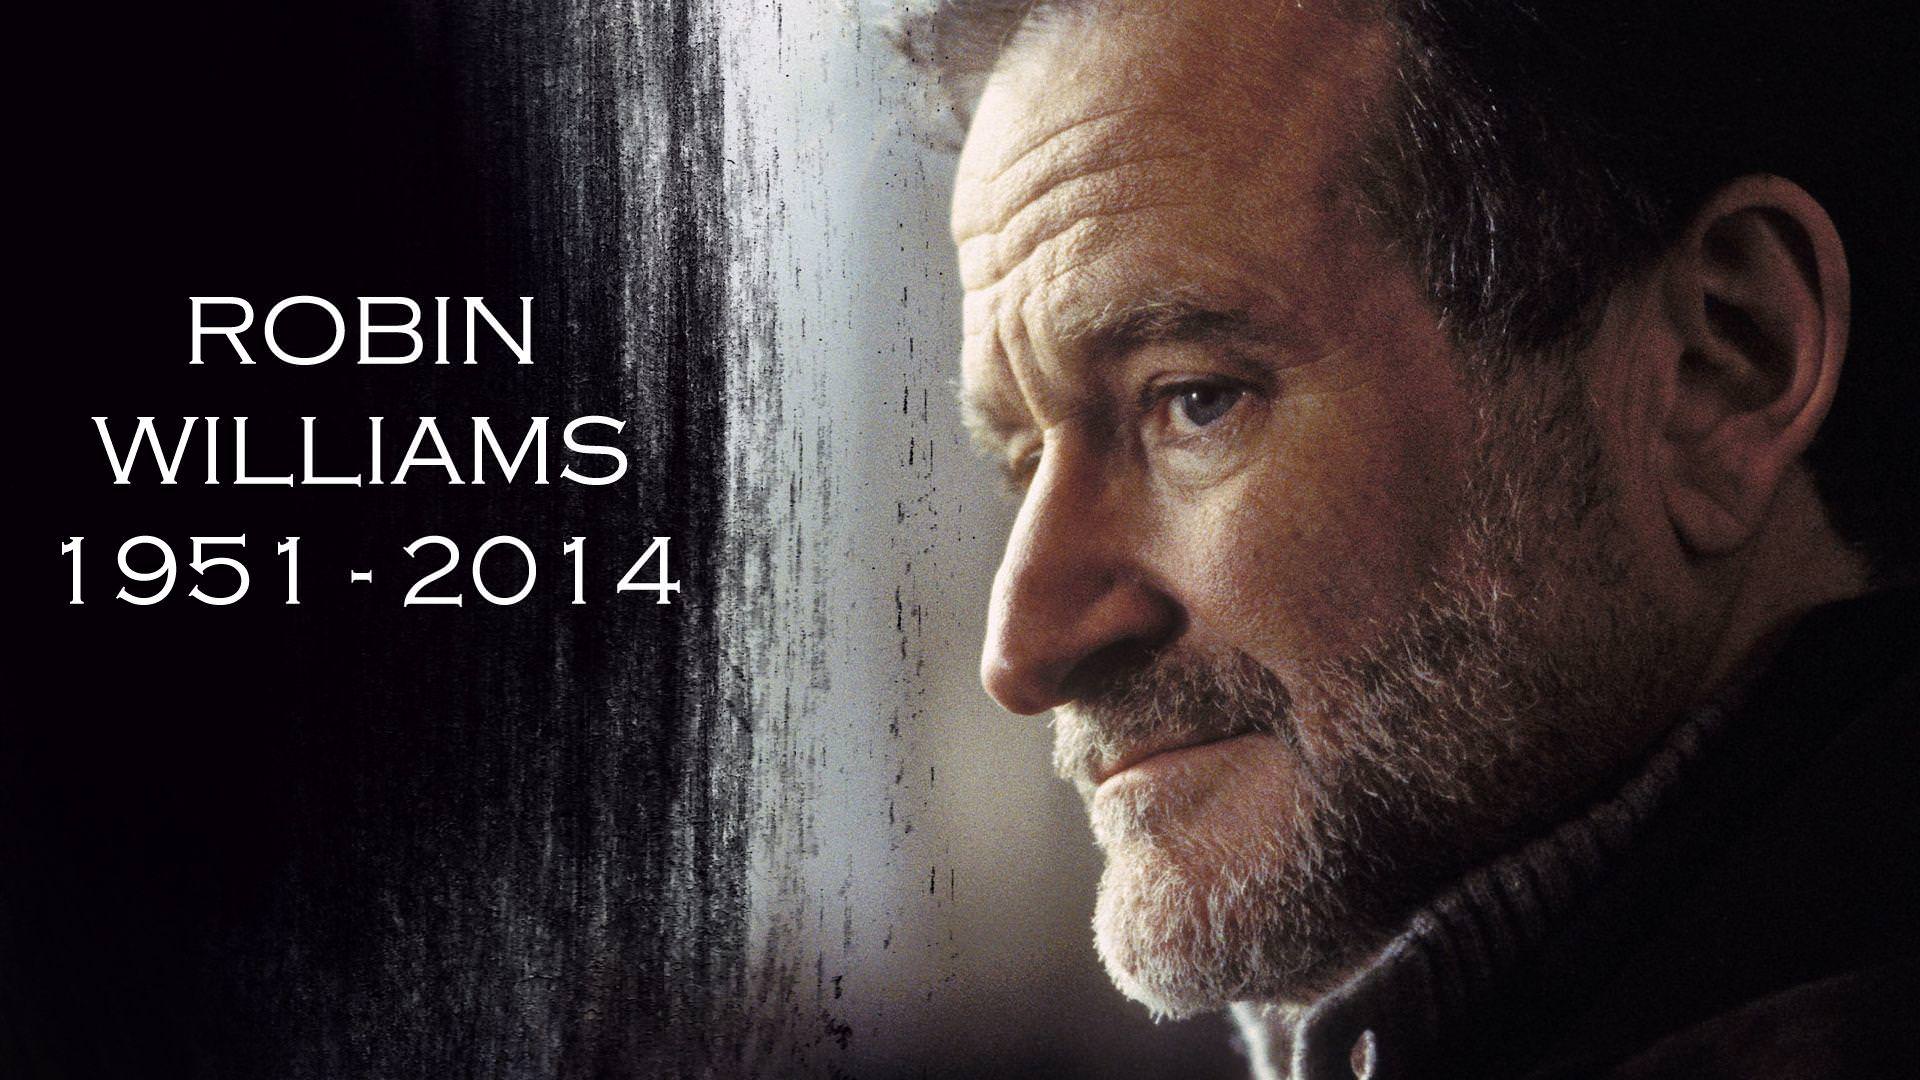 Download Robin Williams iPhone Images Backgrounds In 4K 8K Free Wallpaper -  